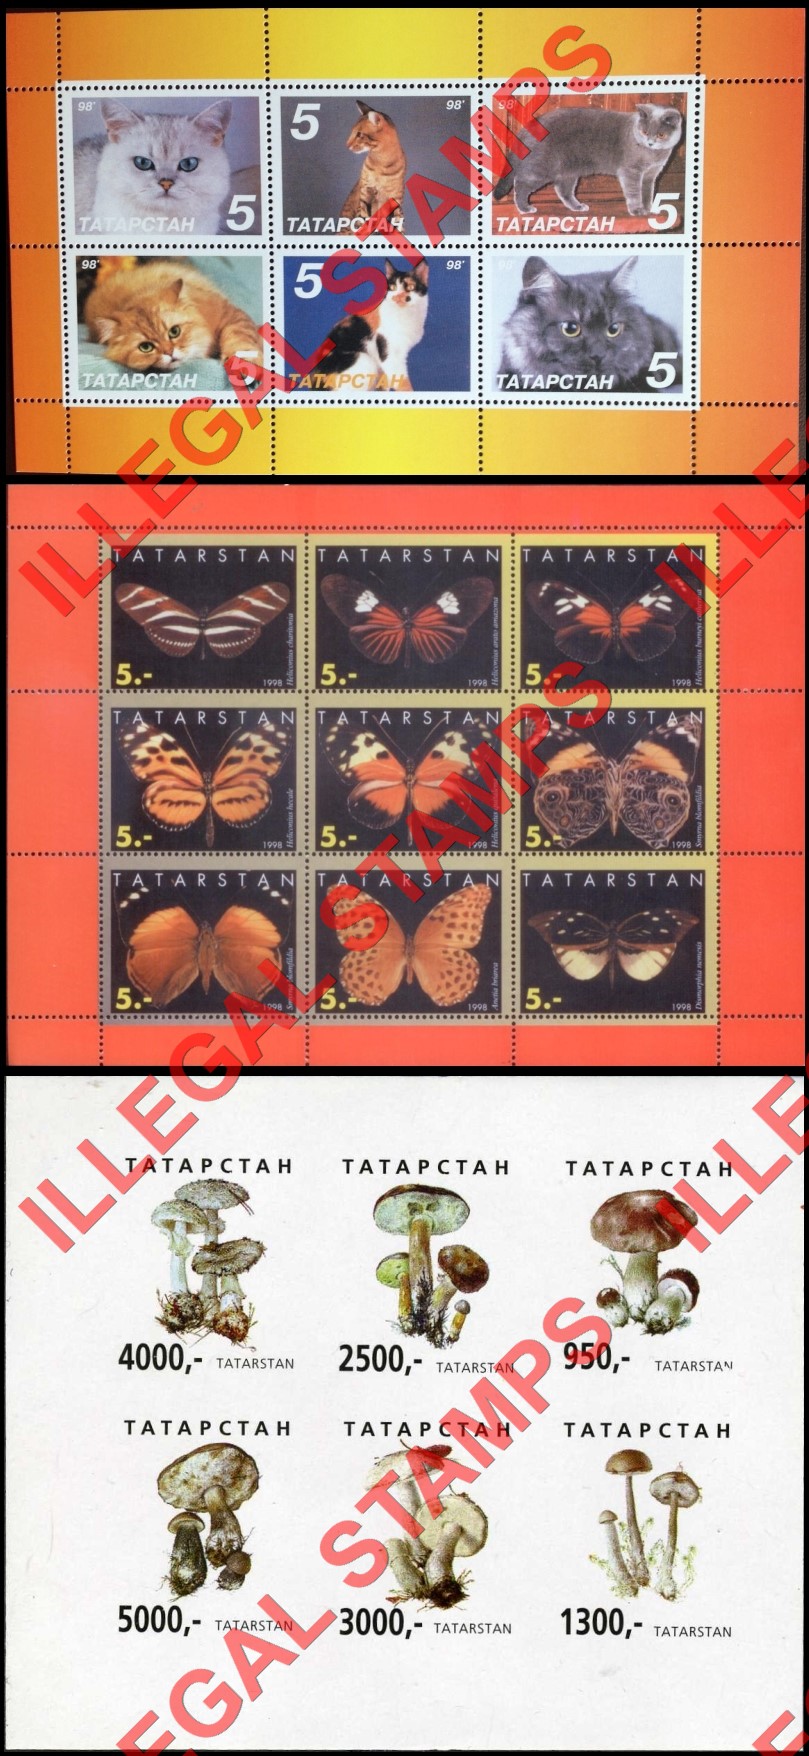 Republic of Tatarstan 1998 Counterfeit Illegal Stamps (Part 1)